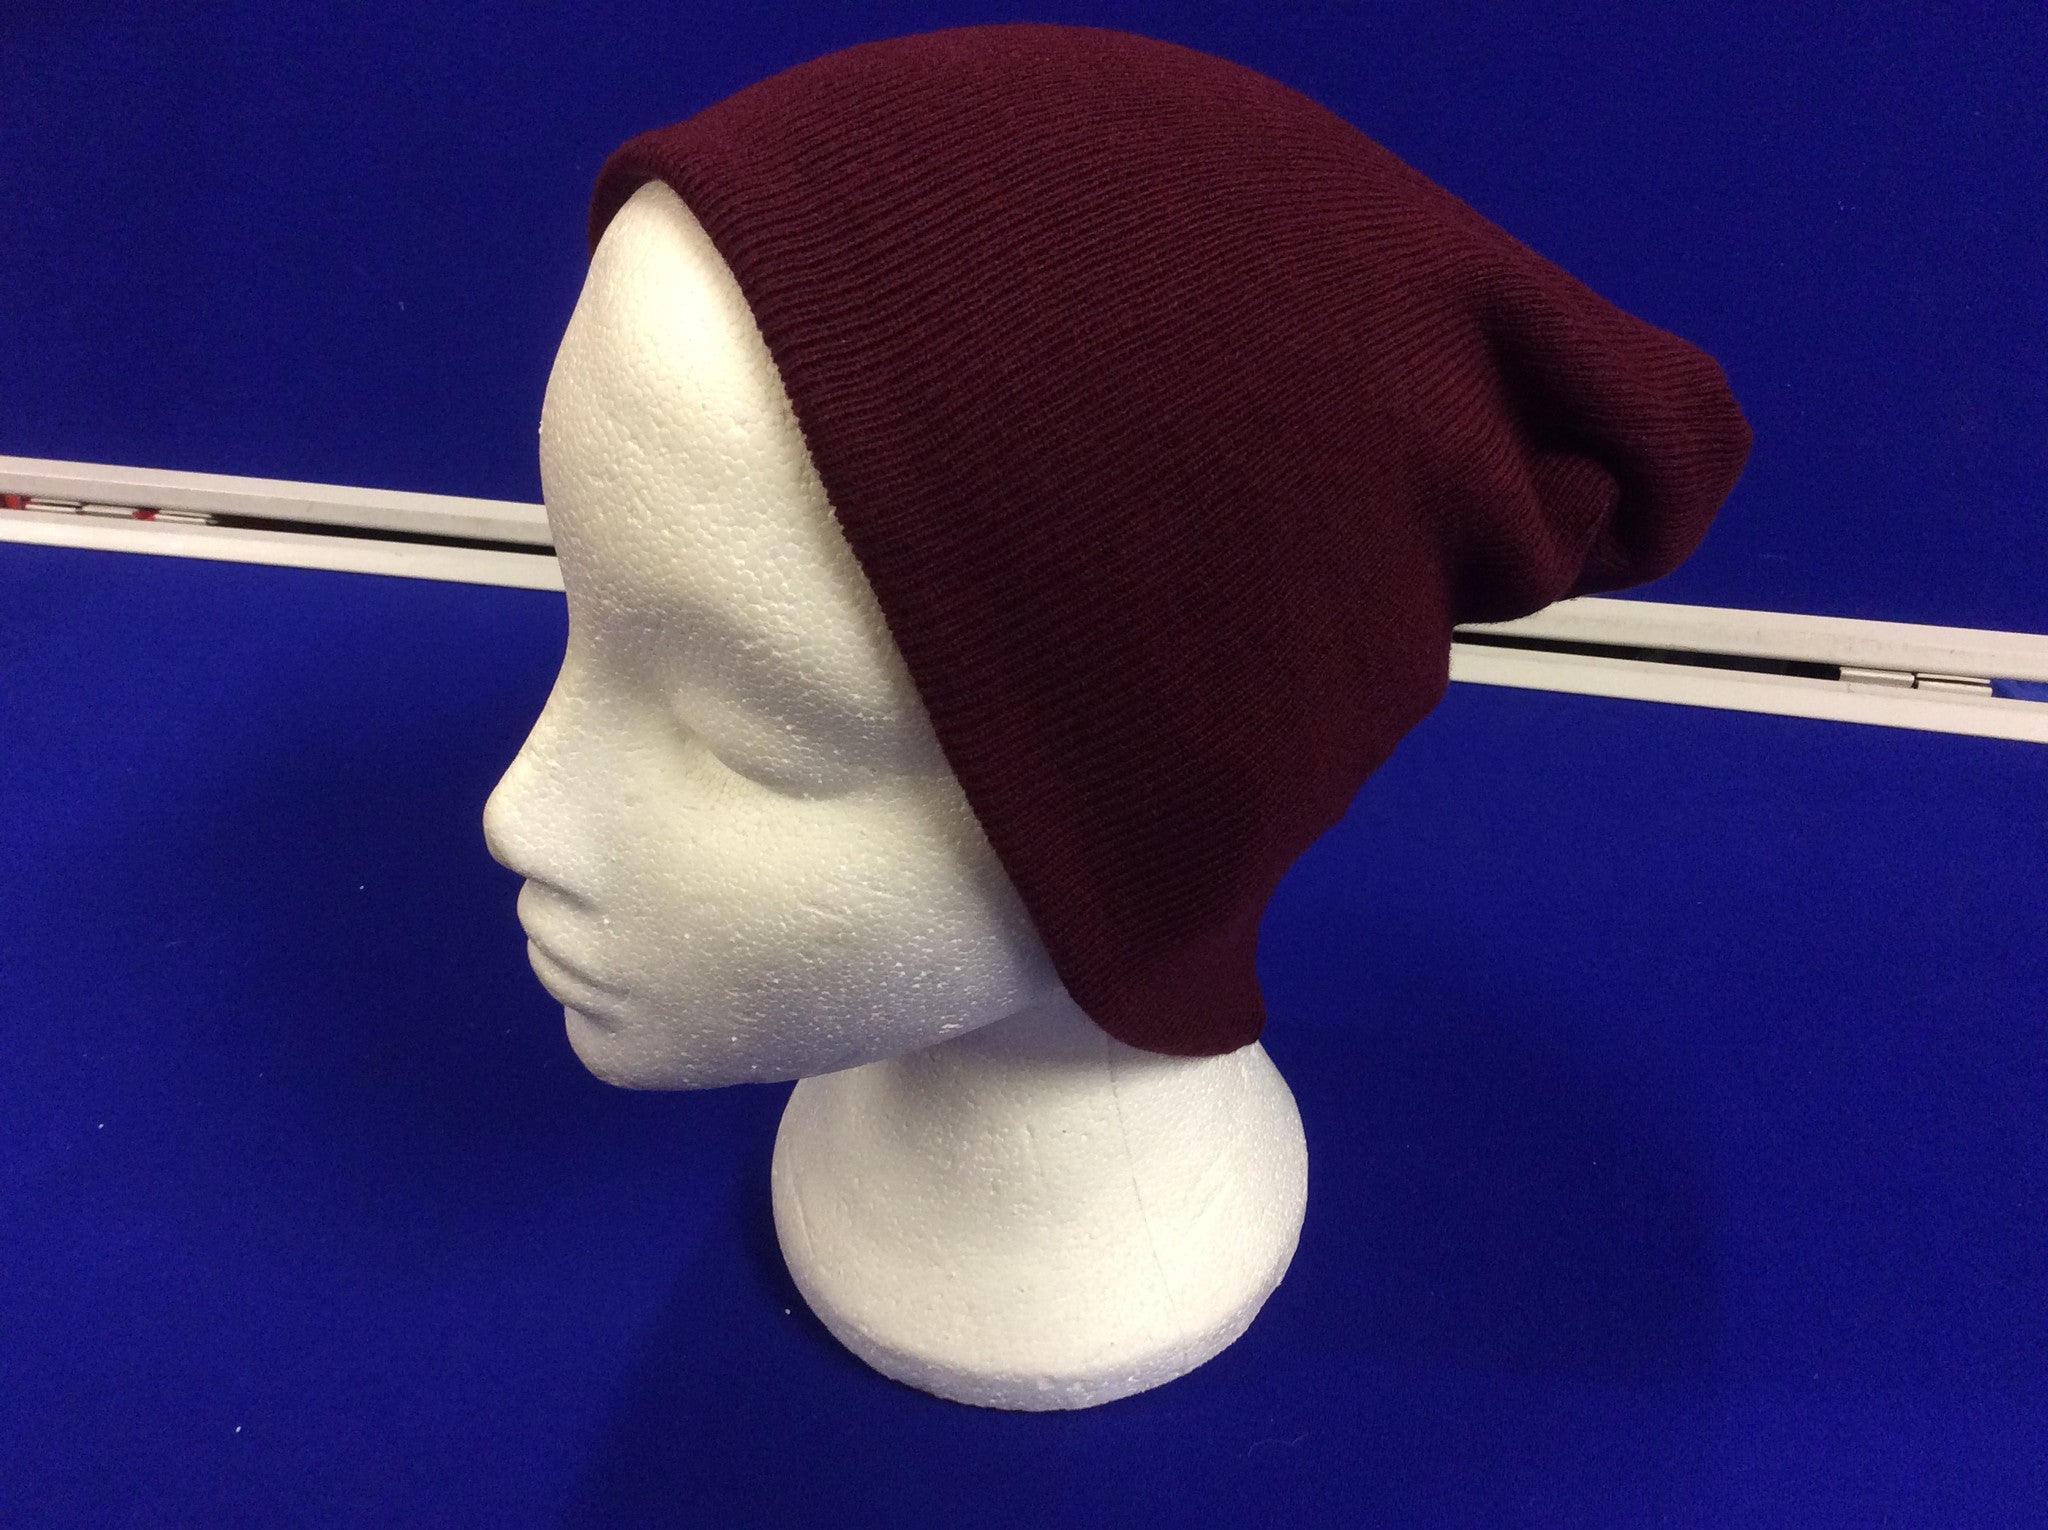 Reversible Beanie Hat Double Lined - 4 Designs in One - Burgundy/Grey/White/Black Stripe